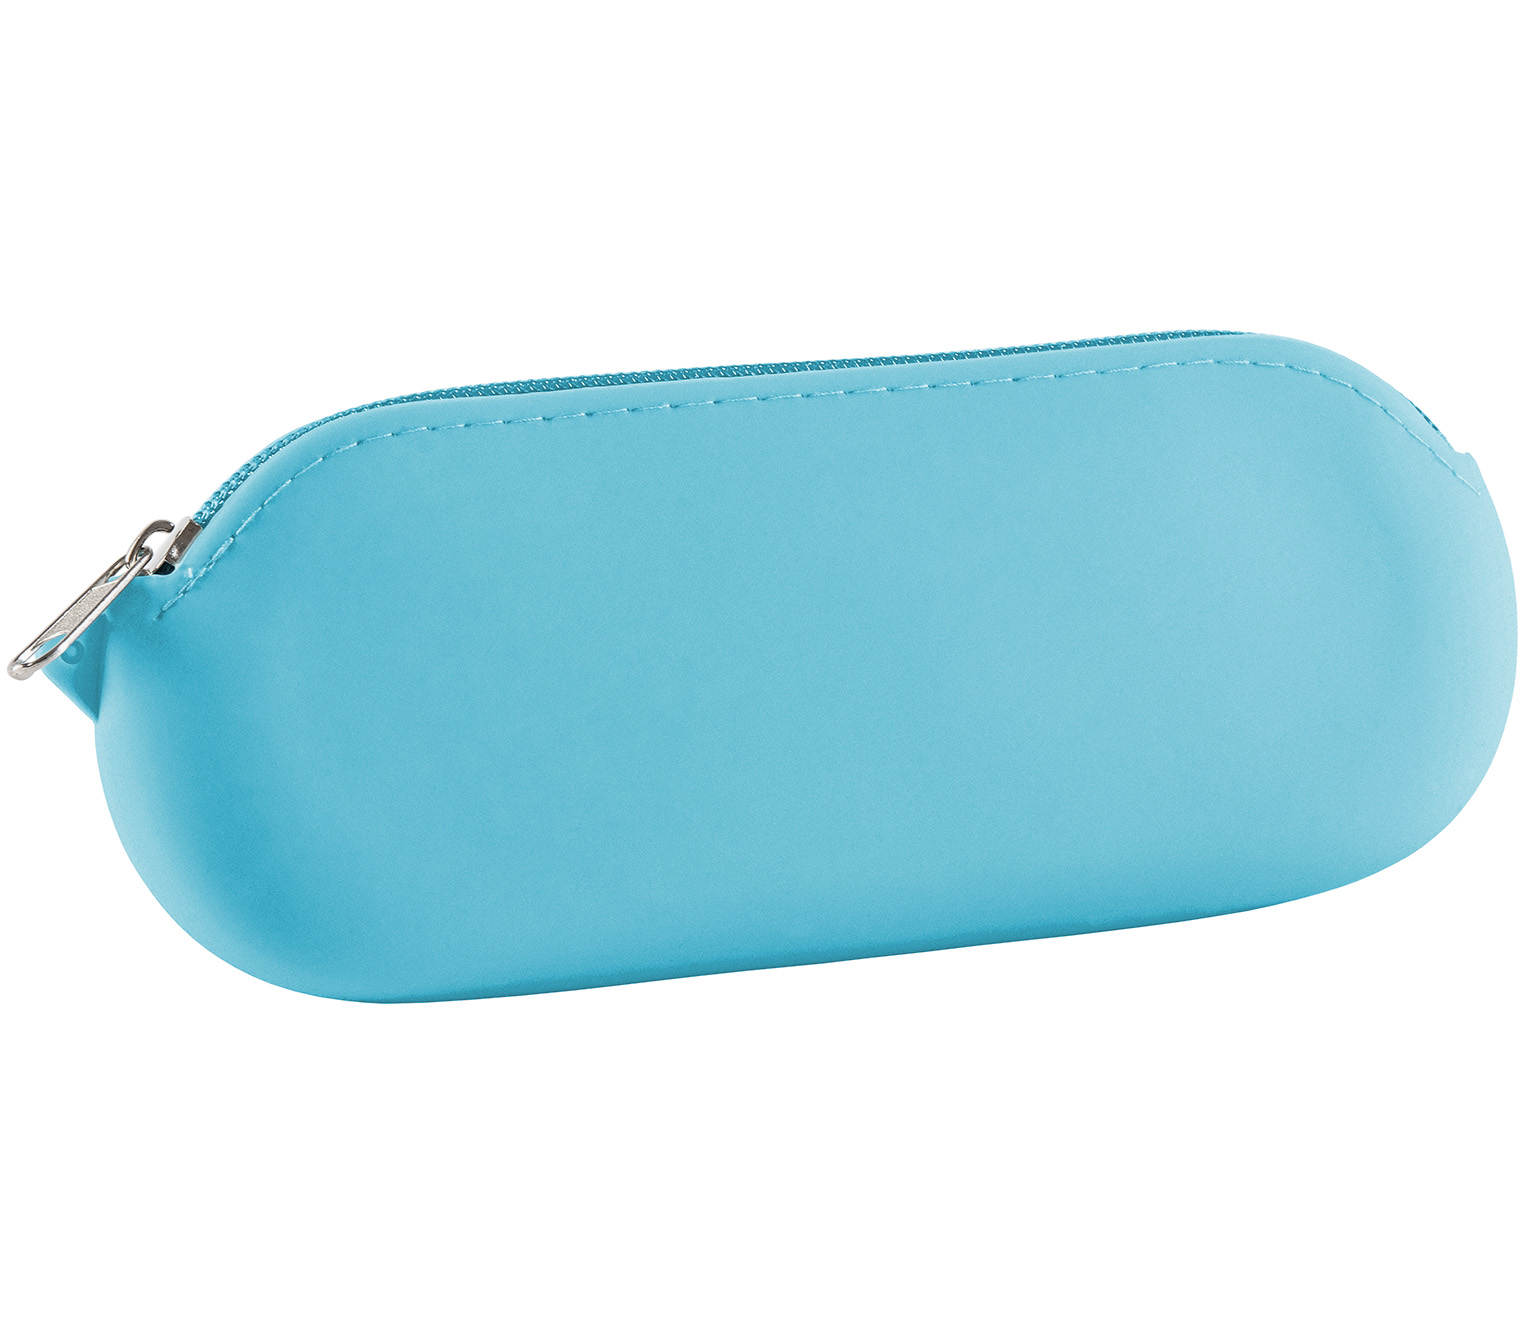 Main Image (Angle) - Buzz (Blue) Glasses Cases Accessories